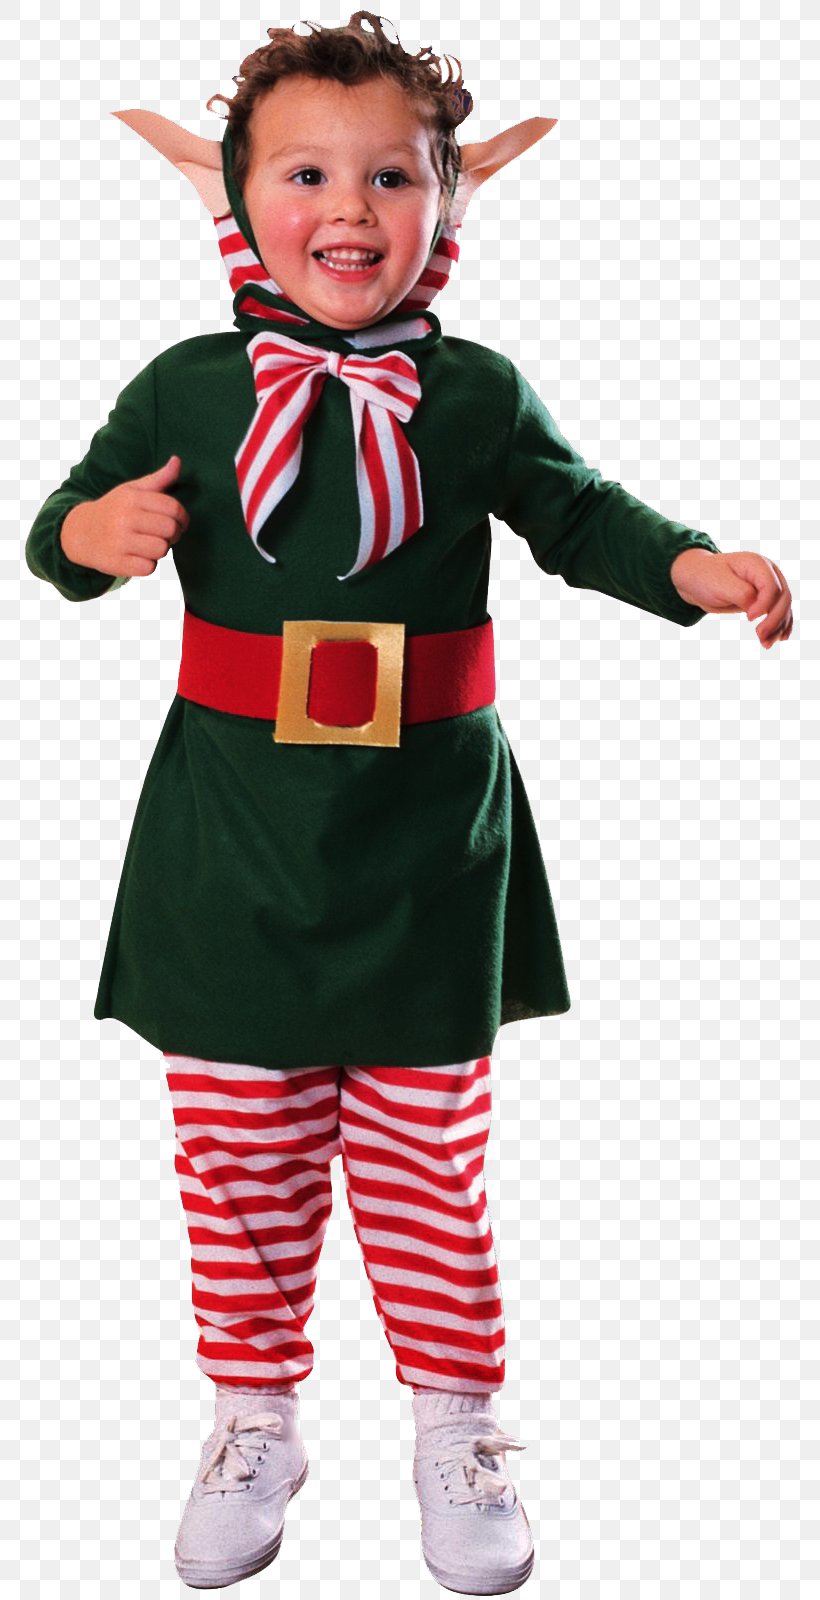 Santa Claus Costume Clothing Suit Child, PNG, 769x1600px, Santa Claus, Child, Christmas, Christmas Elf, Clothing Download Free